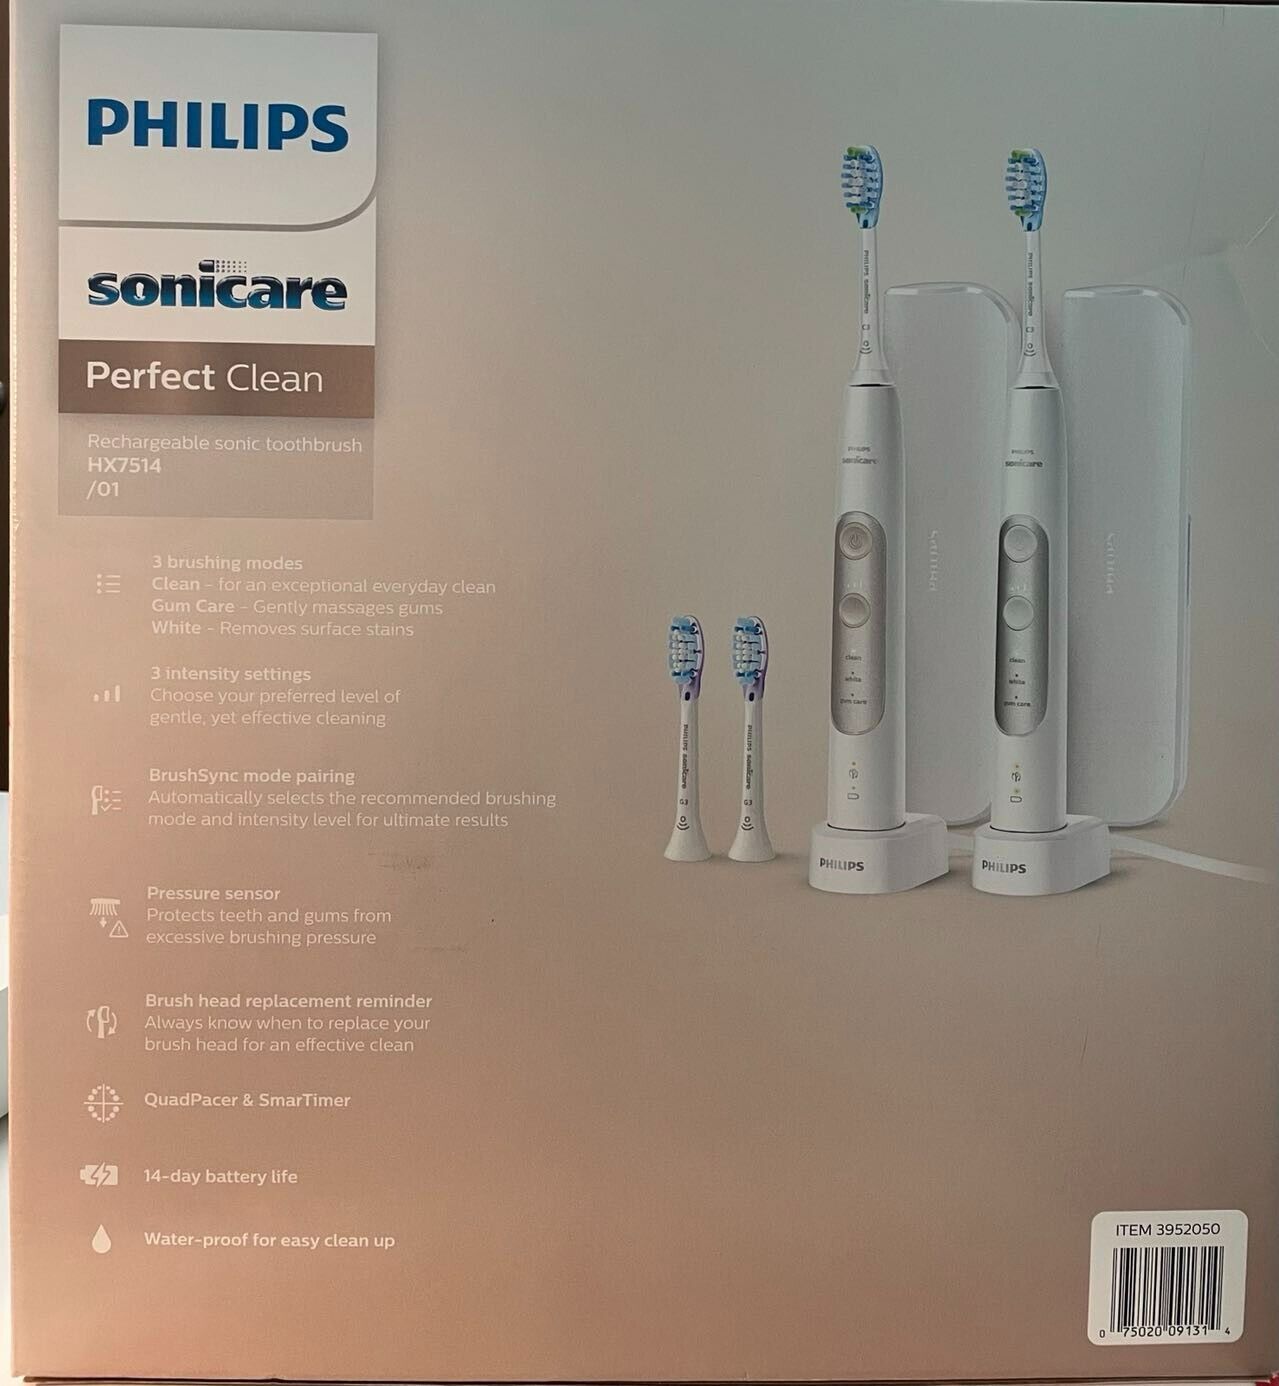 Philips Sonicare PerfectClean Rechargeable Toothbrush, White 2-pack HX7514/01